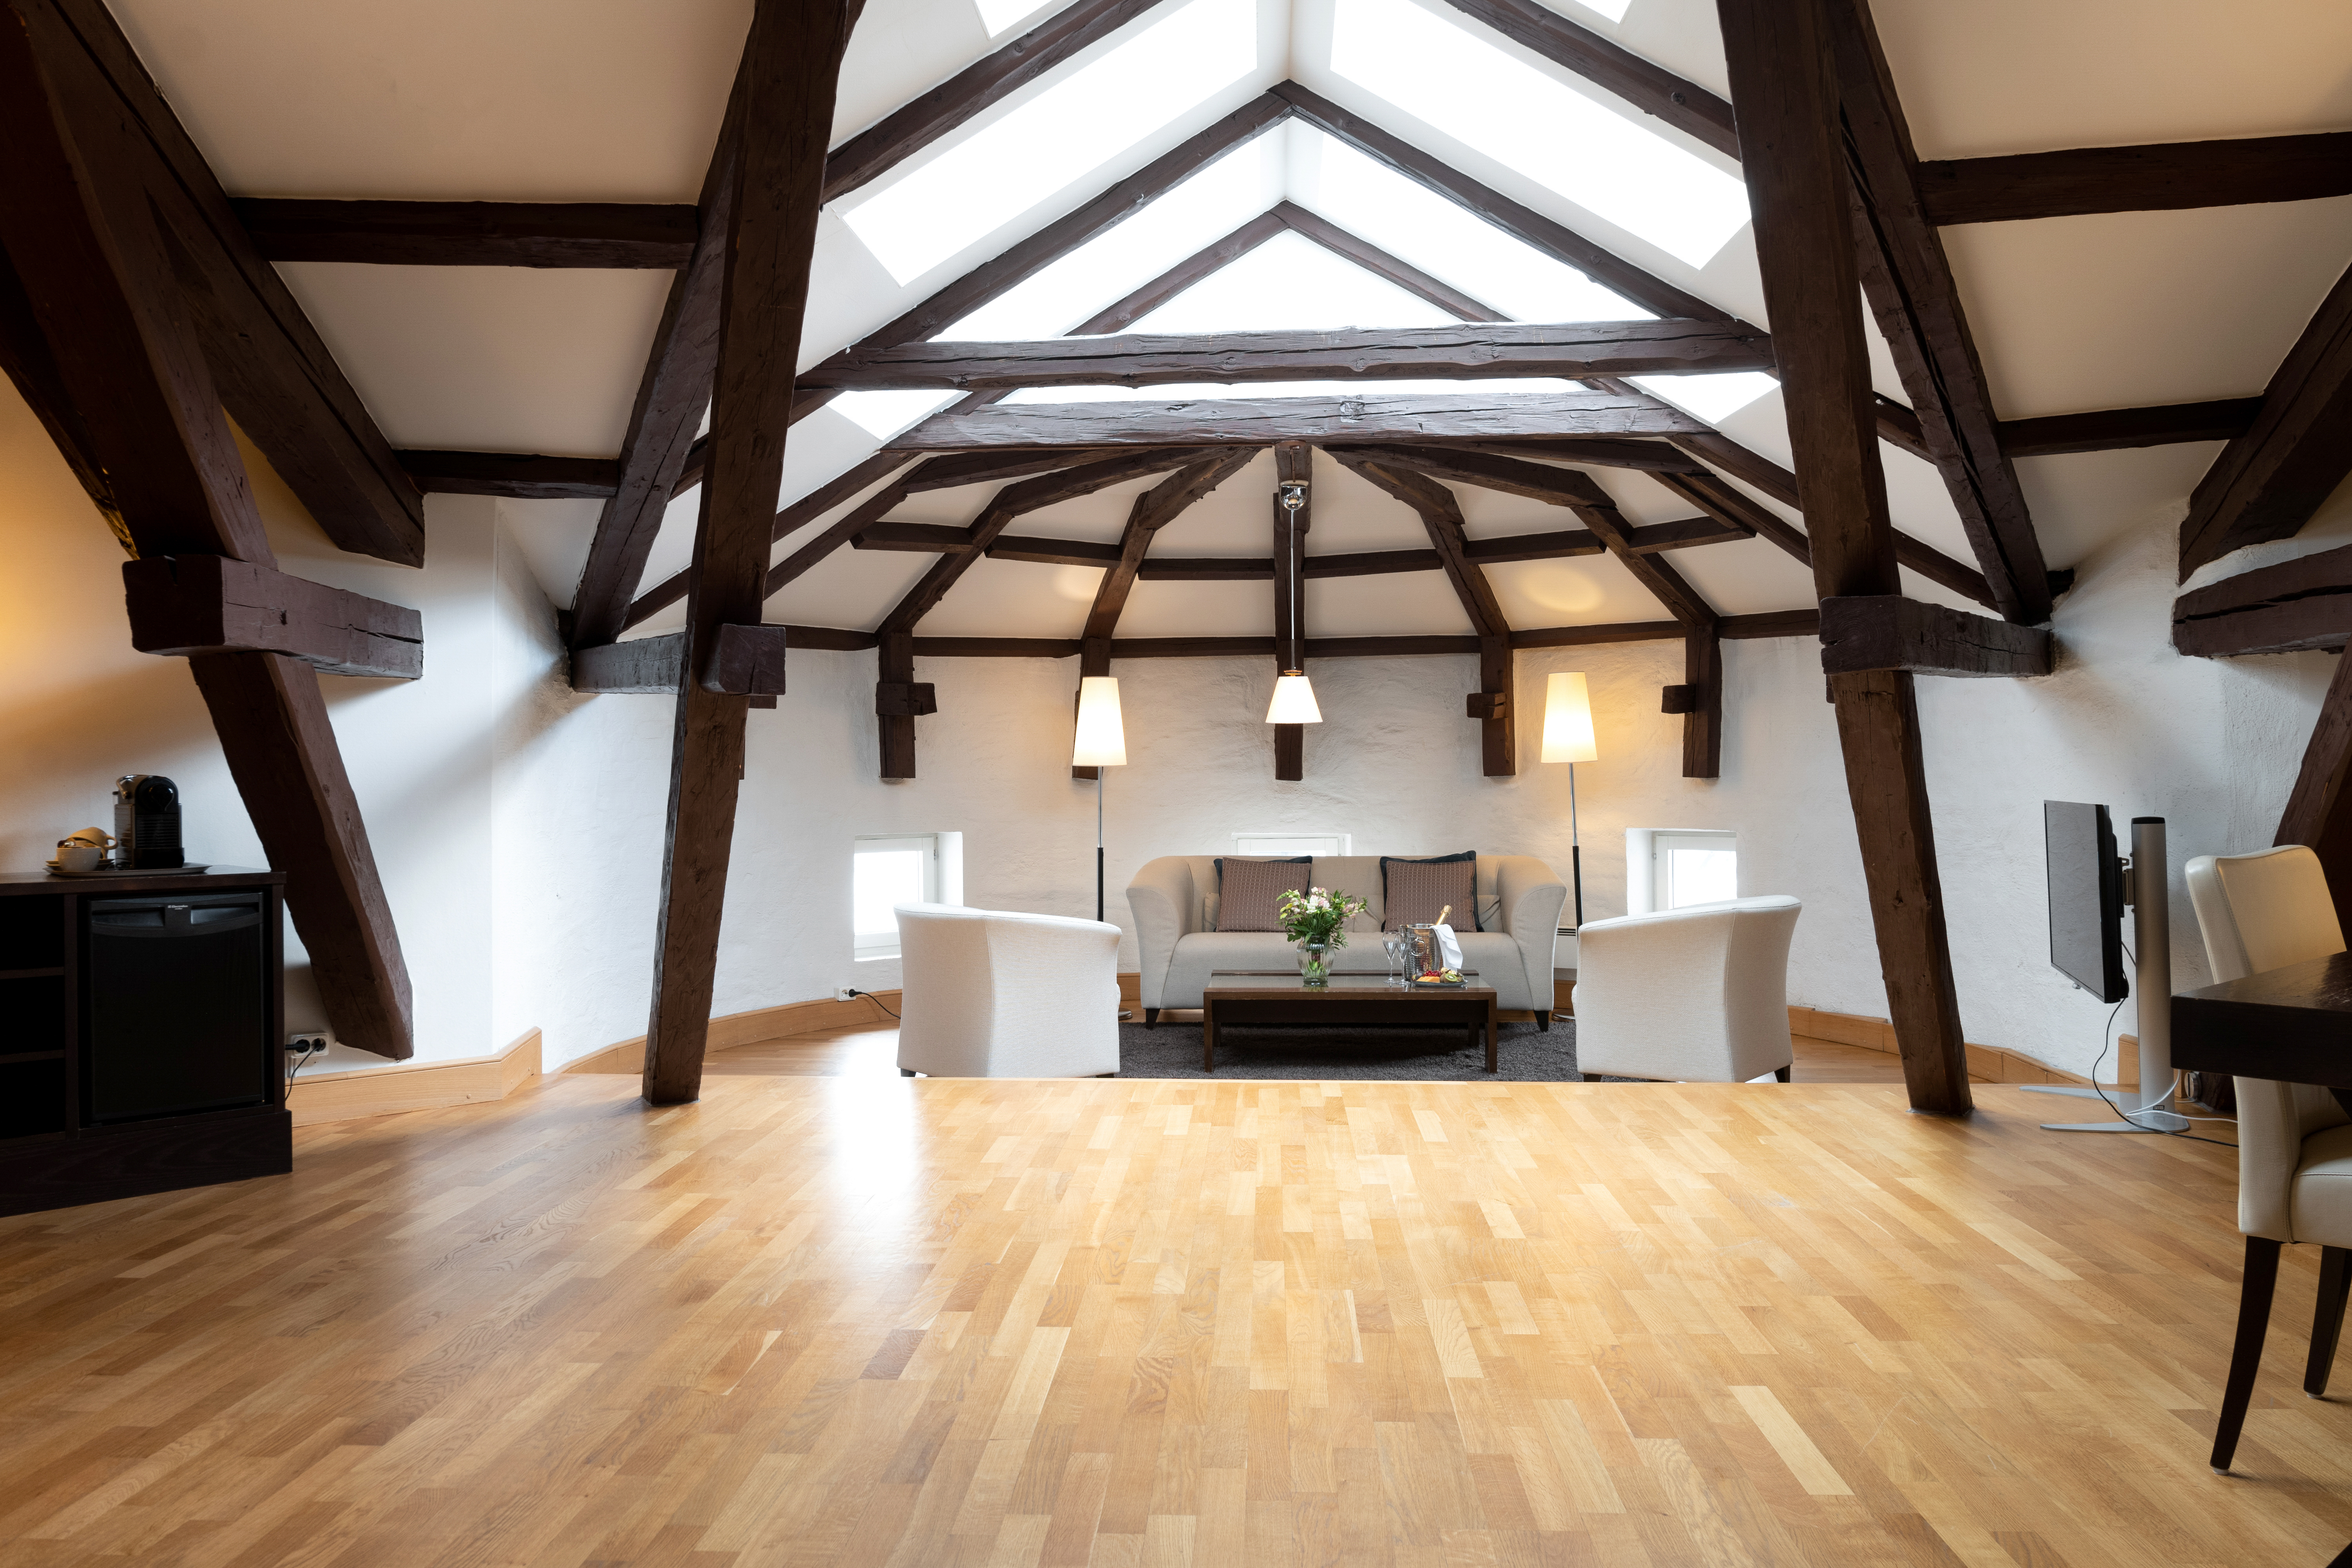 Bright suite with wooden beams from the ceiling, sofa group and skylight